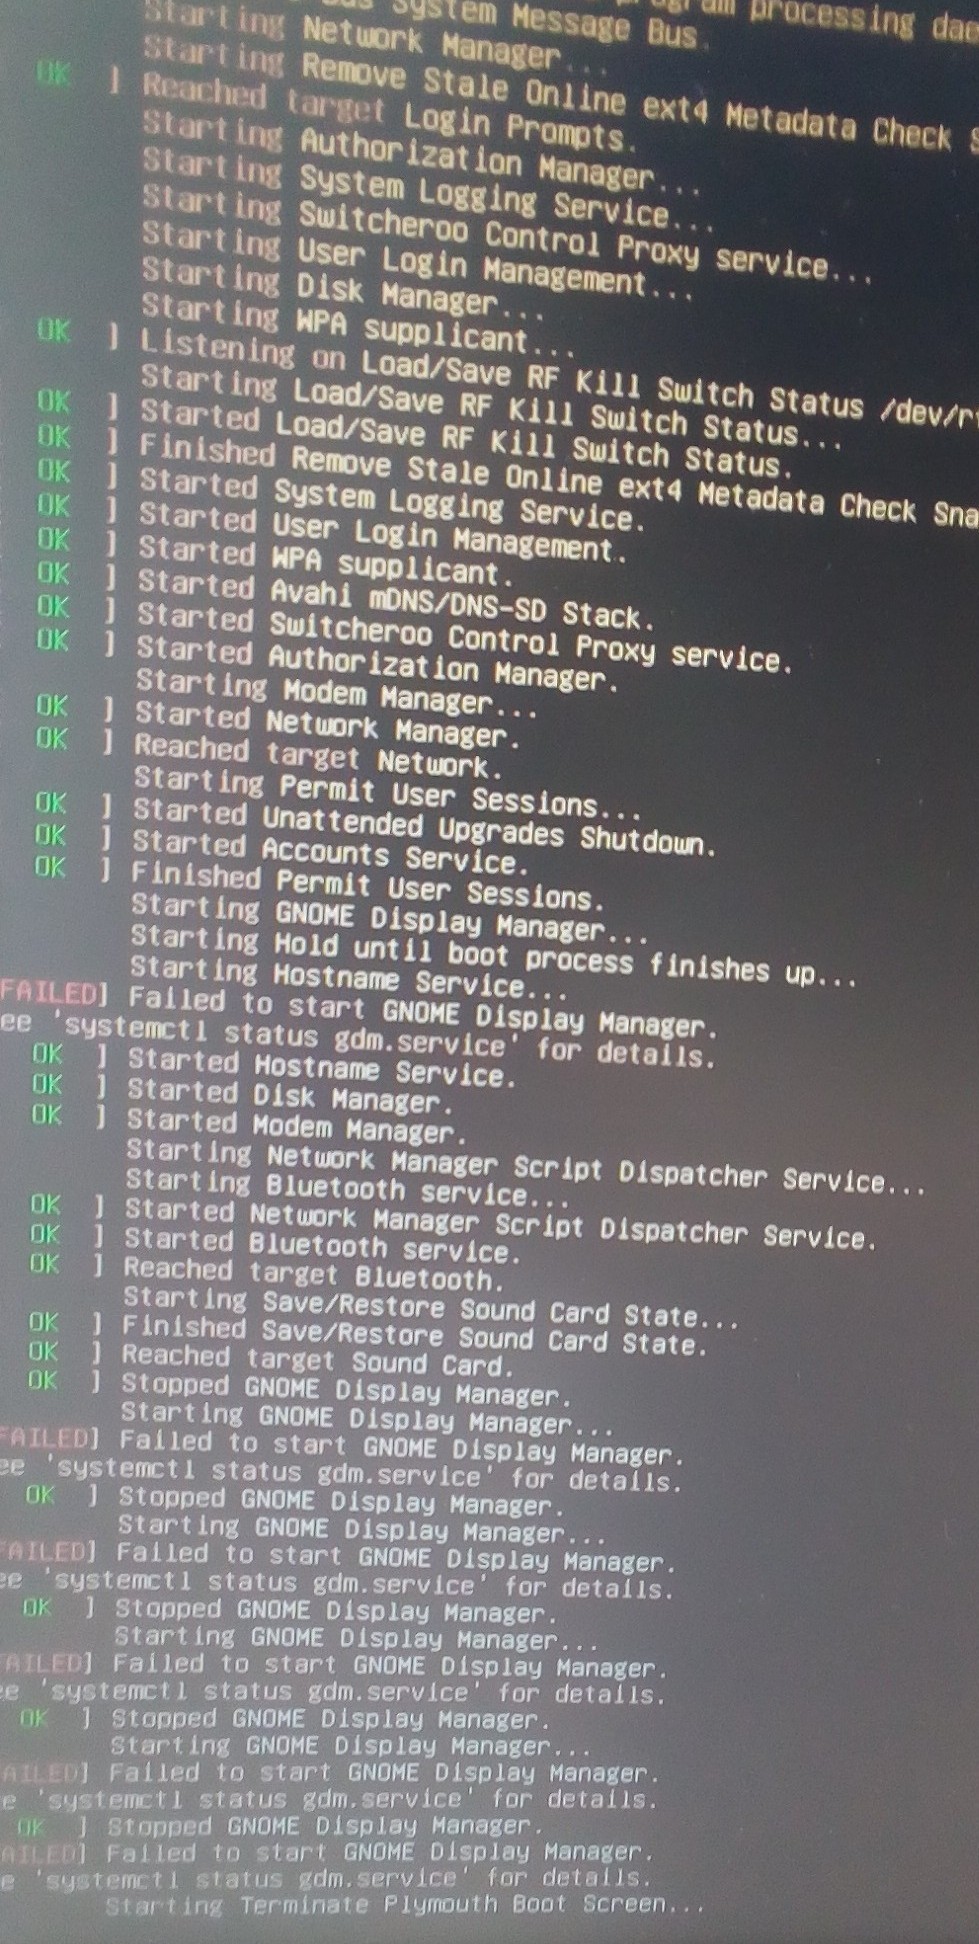 Failed to start GNOME Display Manager when booting